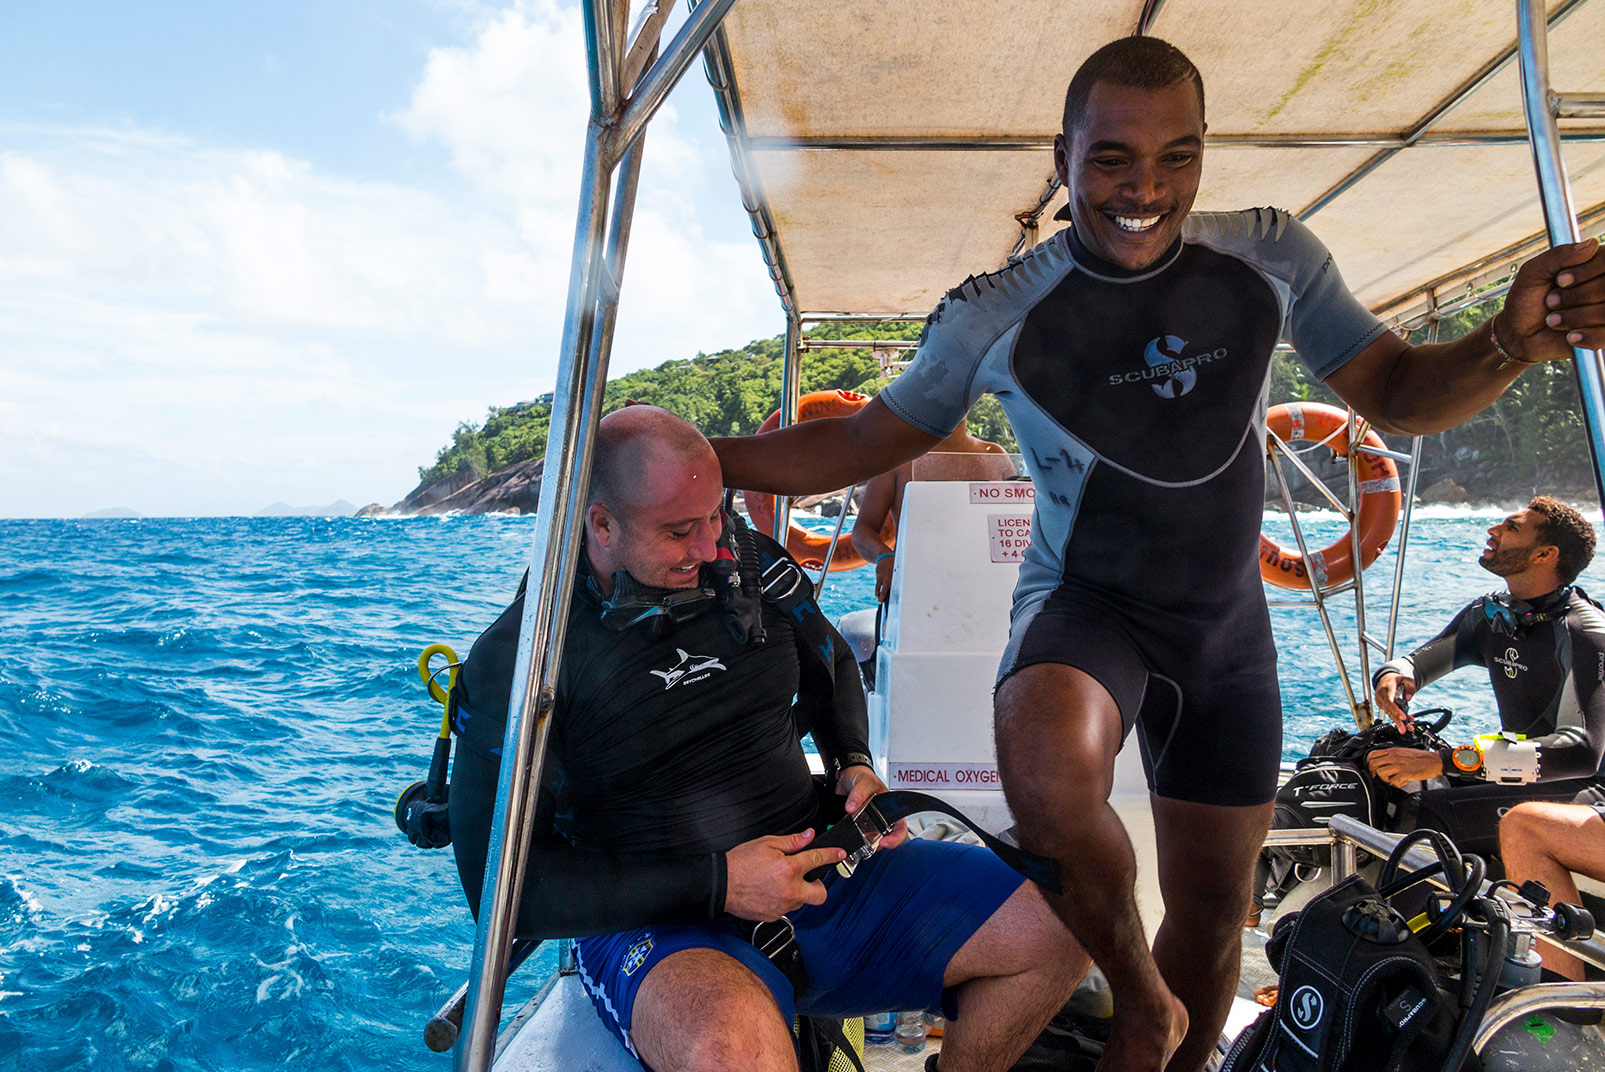 Tourism is a key part of Seychelles’ economy. Grandy Fauchette (standing) is a dive master who takes tourists from local resorts out for coastal dives. The water was too rough for Houston to dive that day in May, but typically the water is “surreal,” he says. “It’s incredibly clear and the colors are ridiculous. It’s like any of those postcards you see, and you’re like, ‘There’s no way it looks like that.’” Photo © Jason Houston